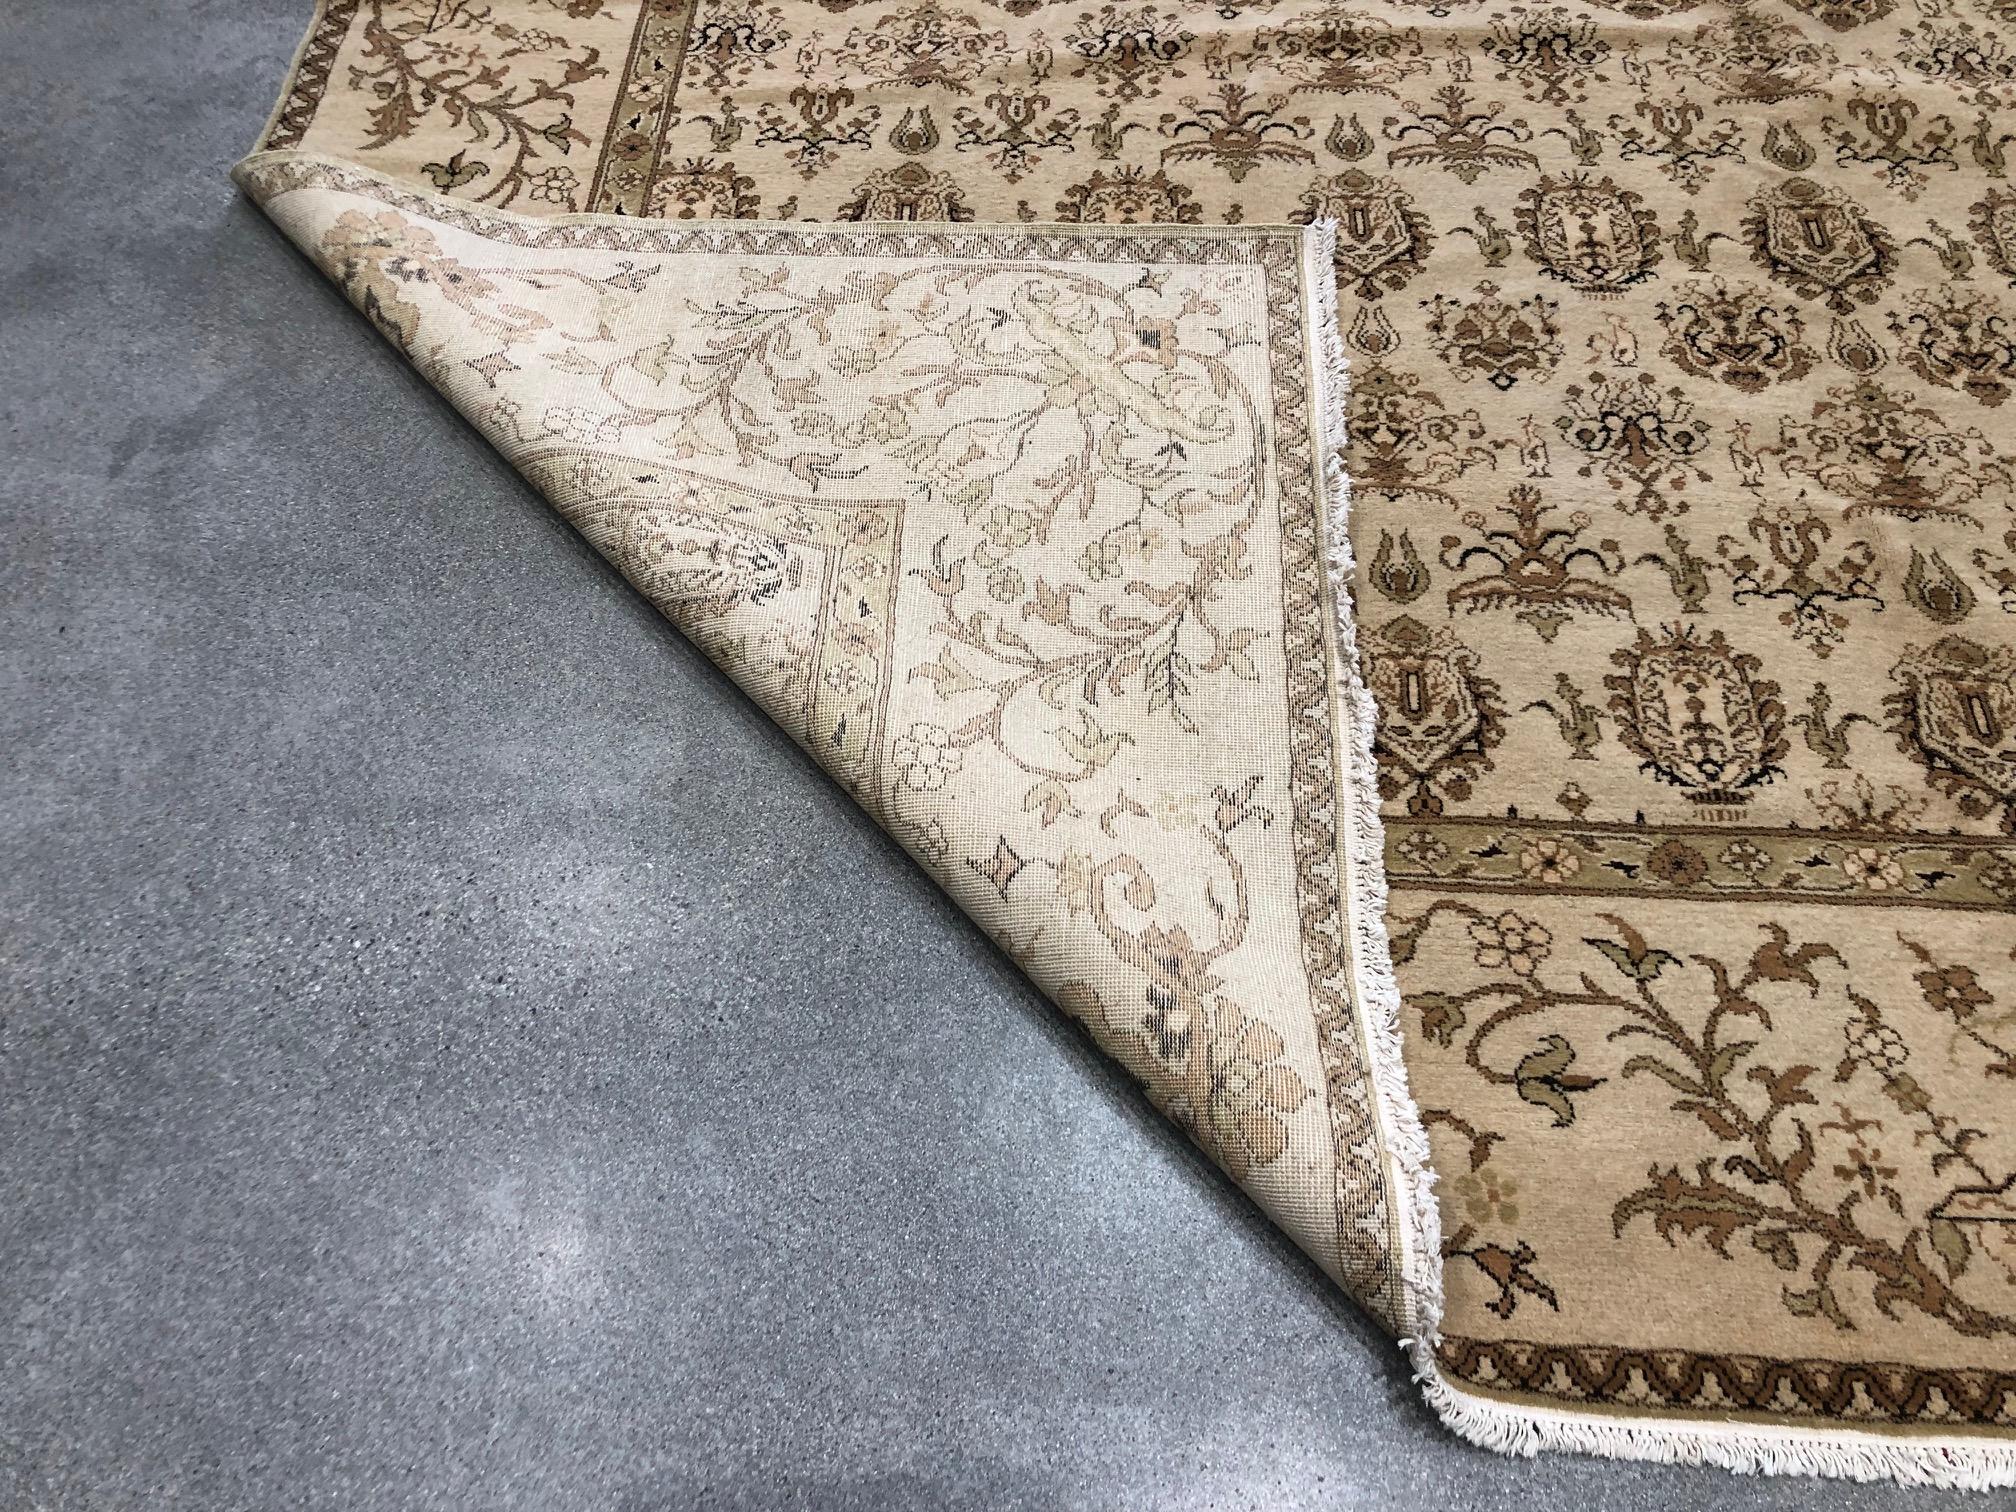 European Design Rug in Beige and Brown In Excellent Condition For Sale In Los Angeles, CA